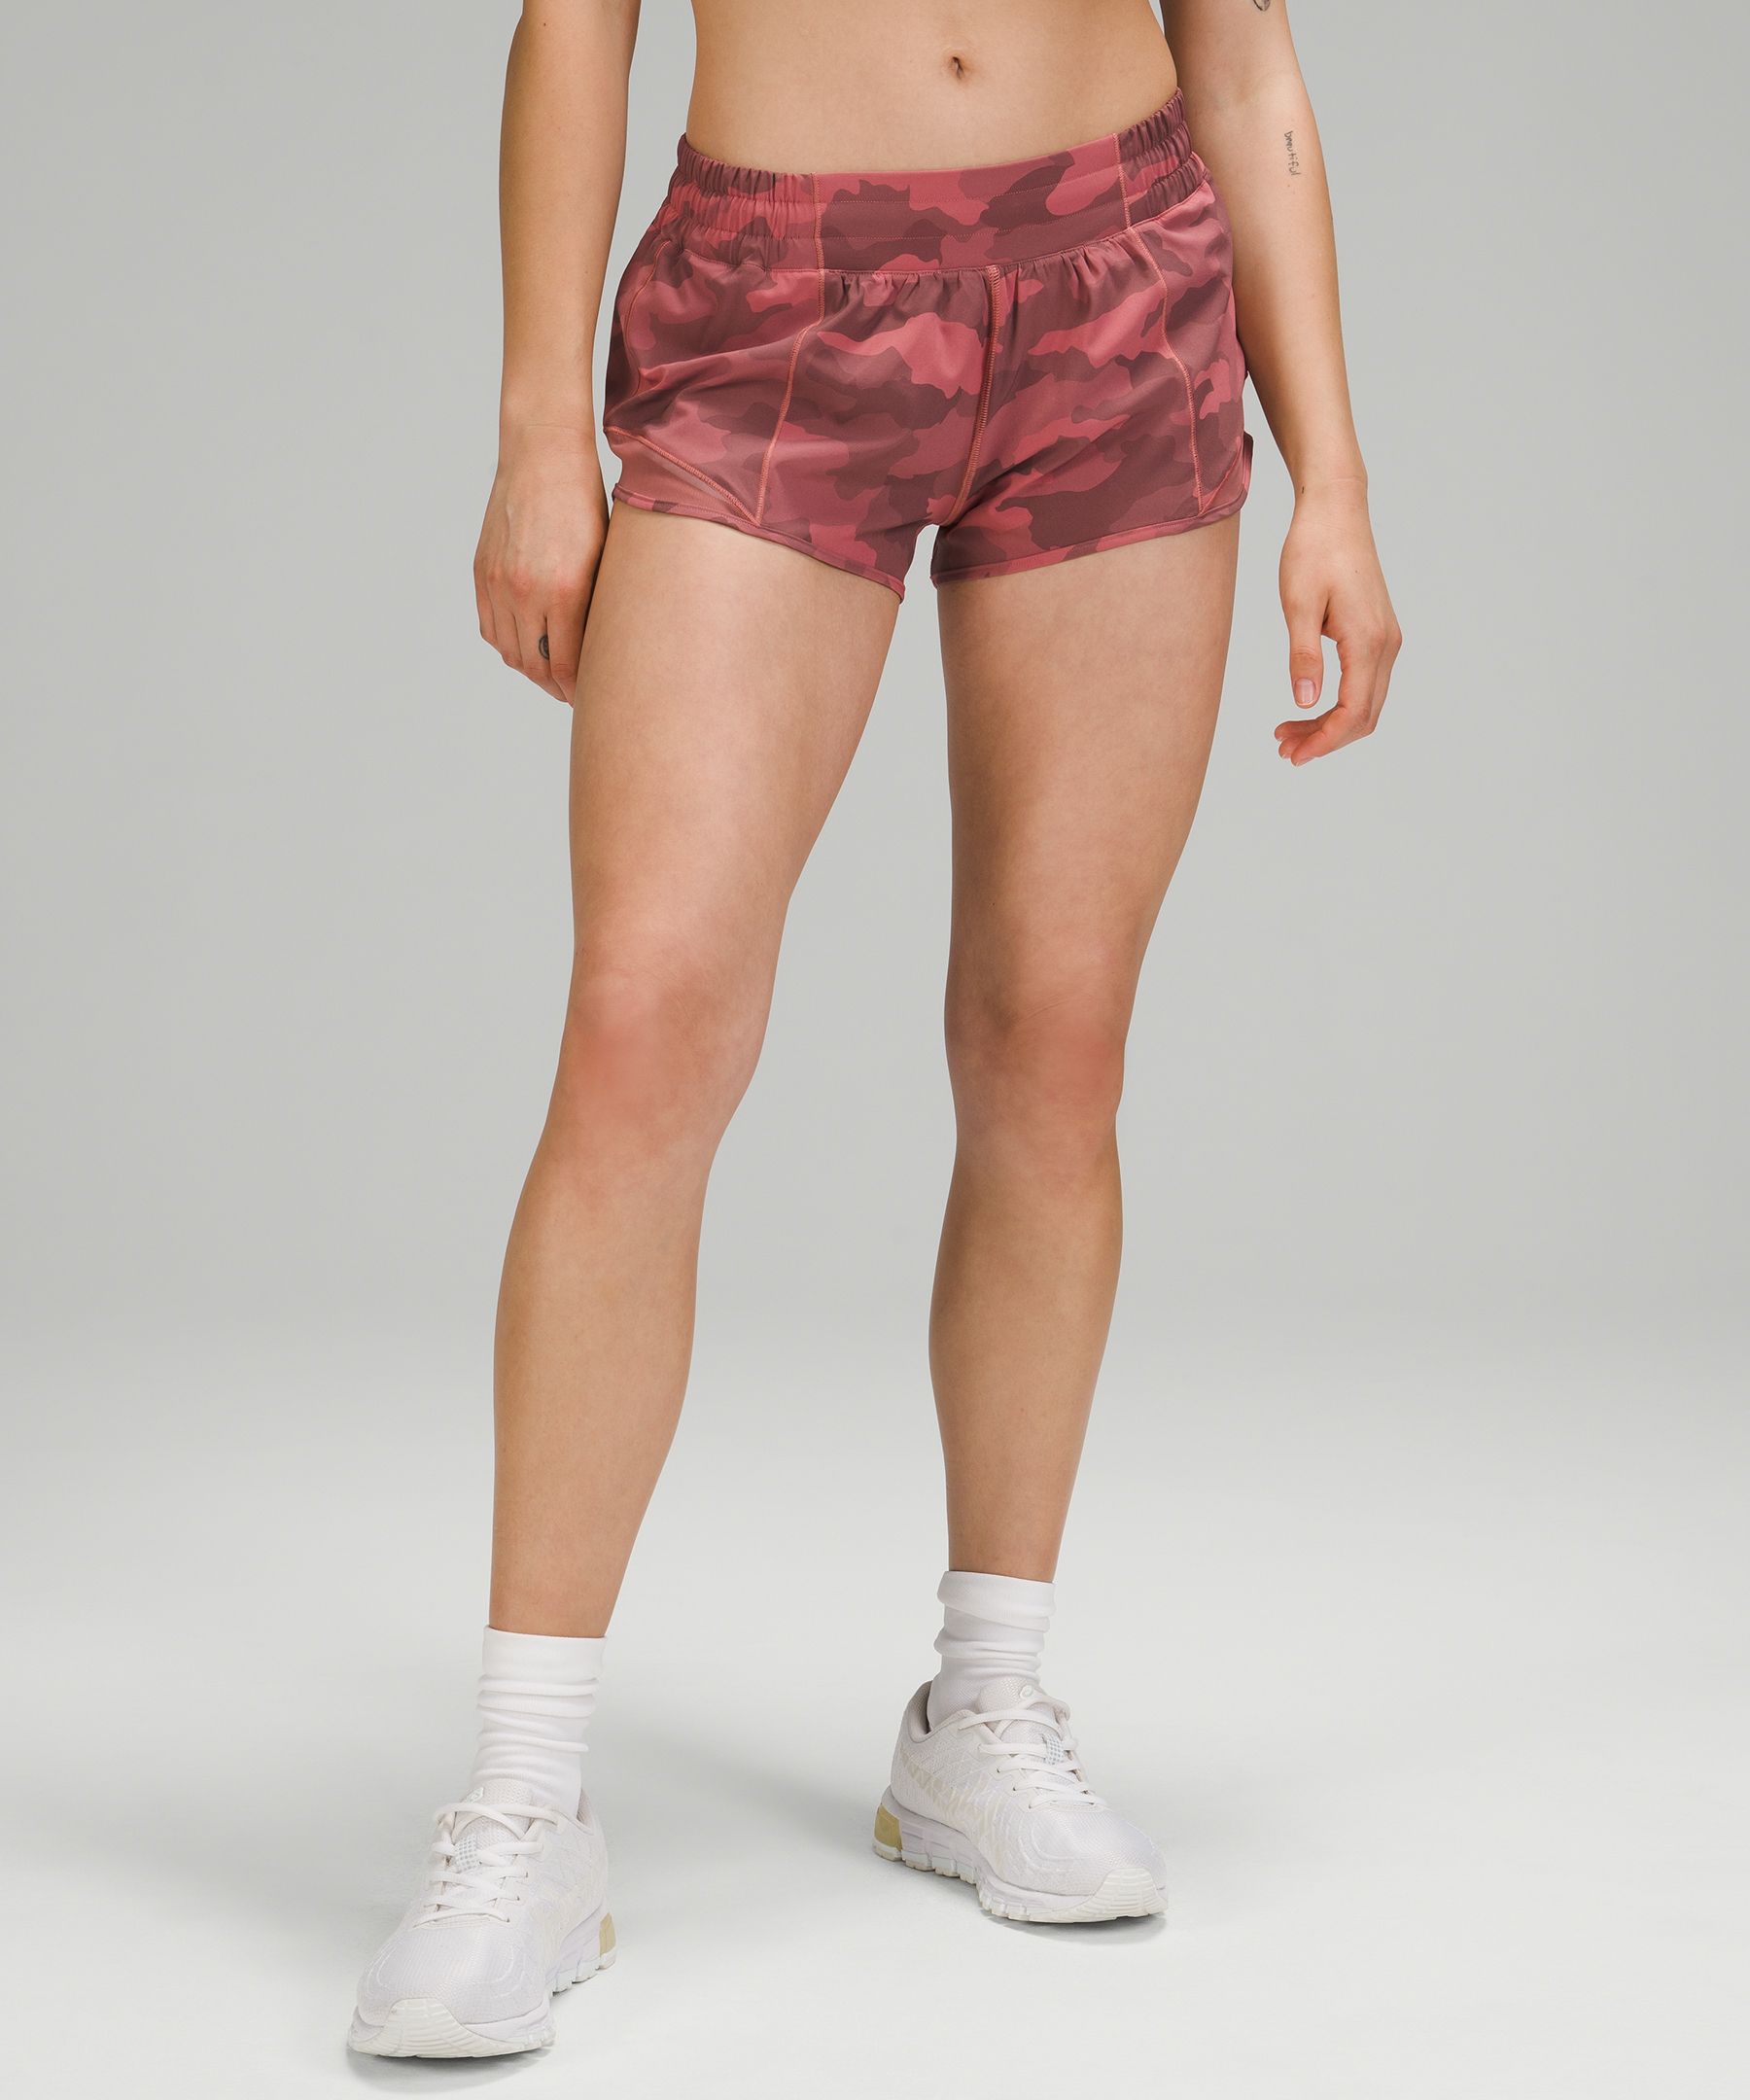 Lululemon Hotty Hot Low-rise Short 2.5" In Printed